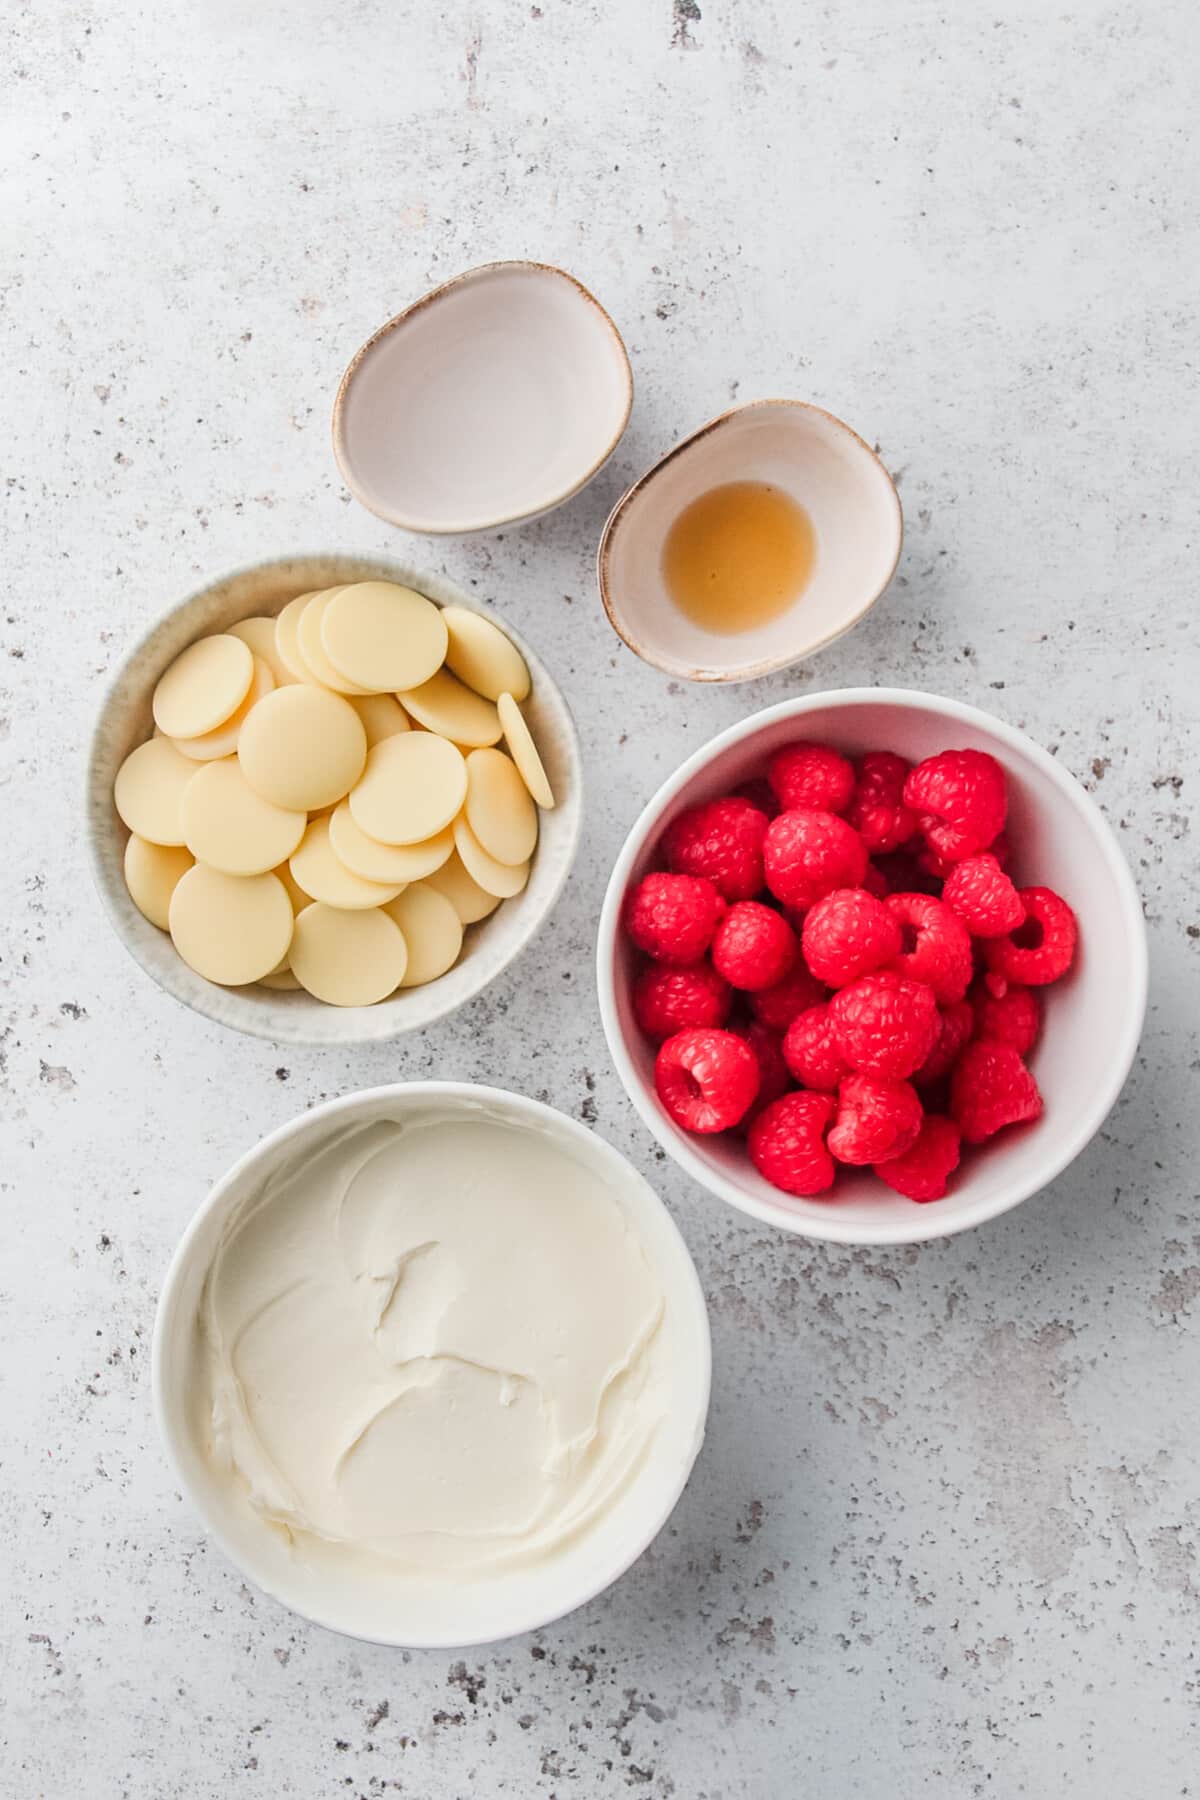 Ingredients for white chocolate raspberry cheesecake fat bombs are laid out in a variety of small plates and bowls on a light grey colored surface.